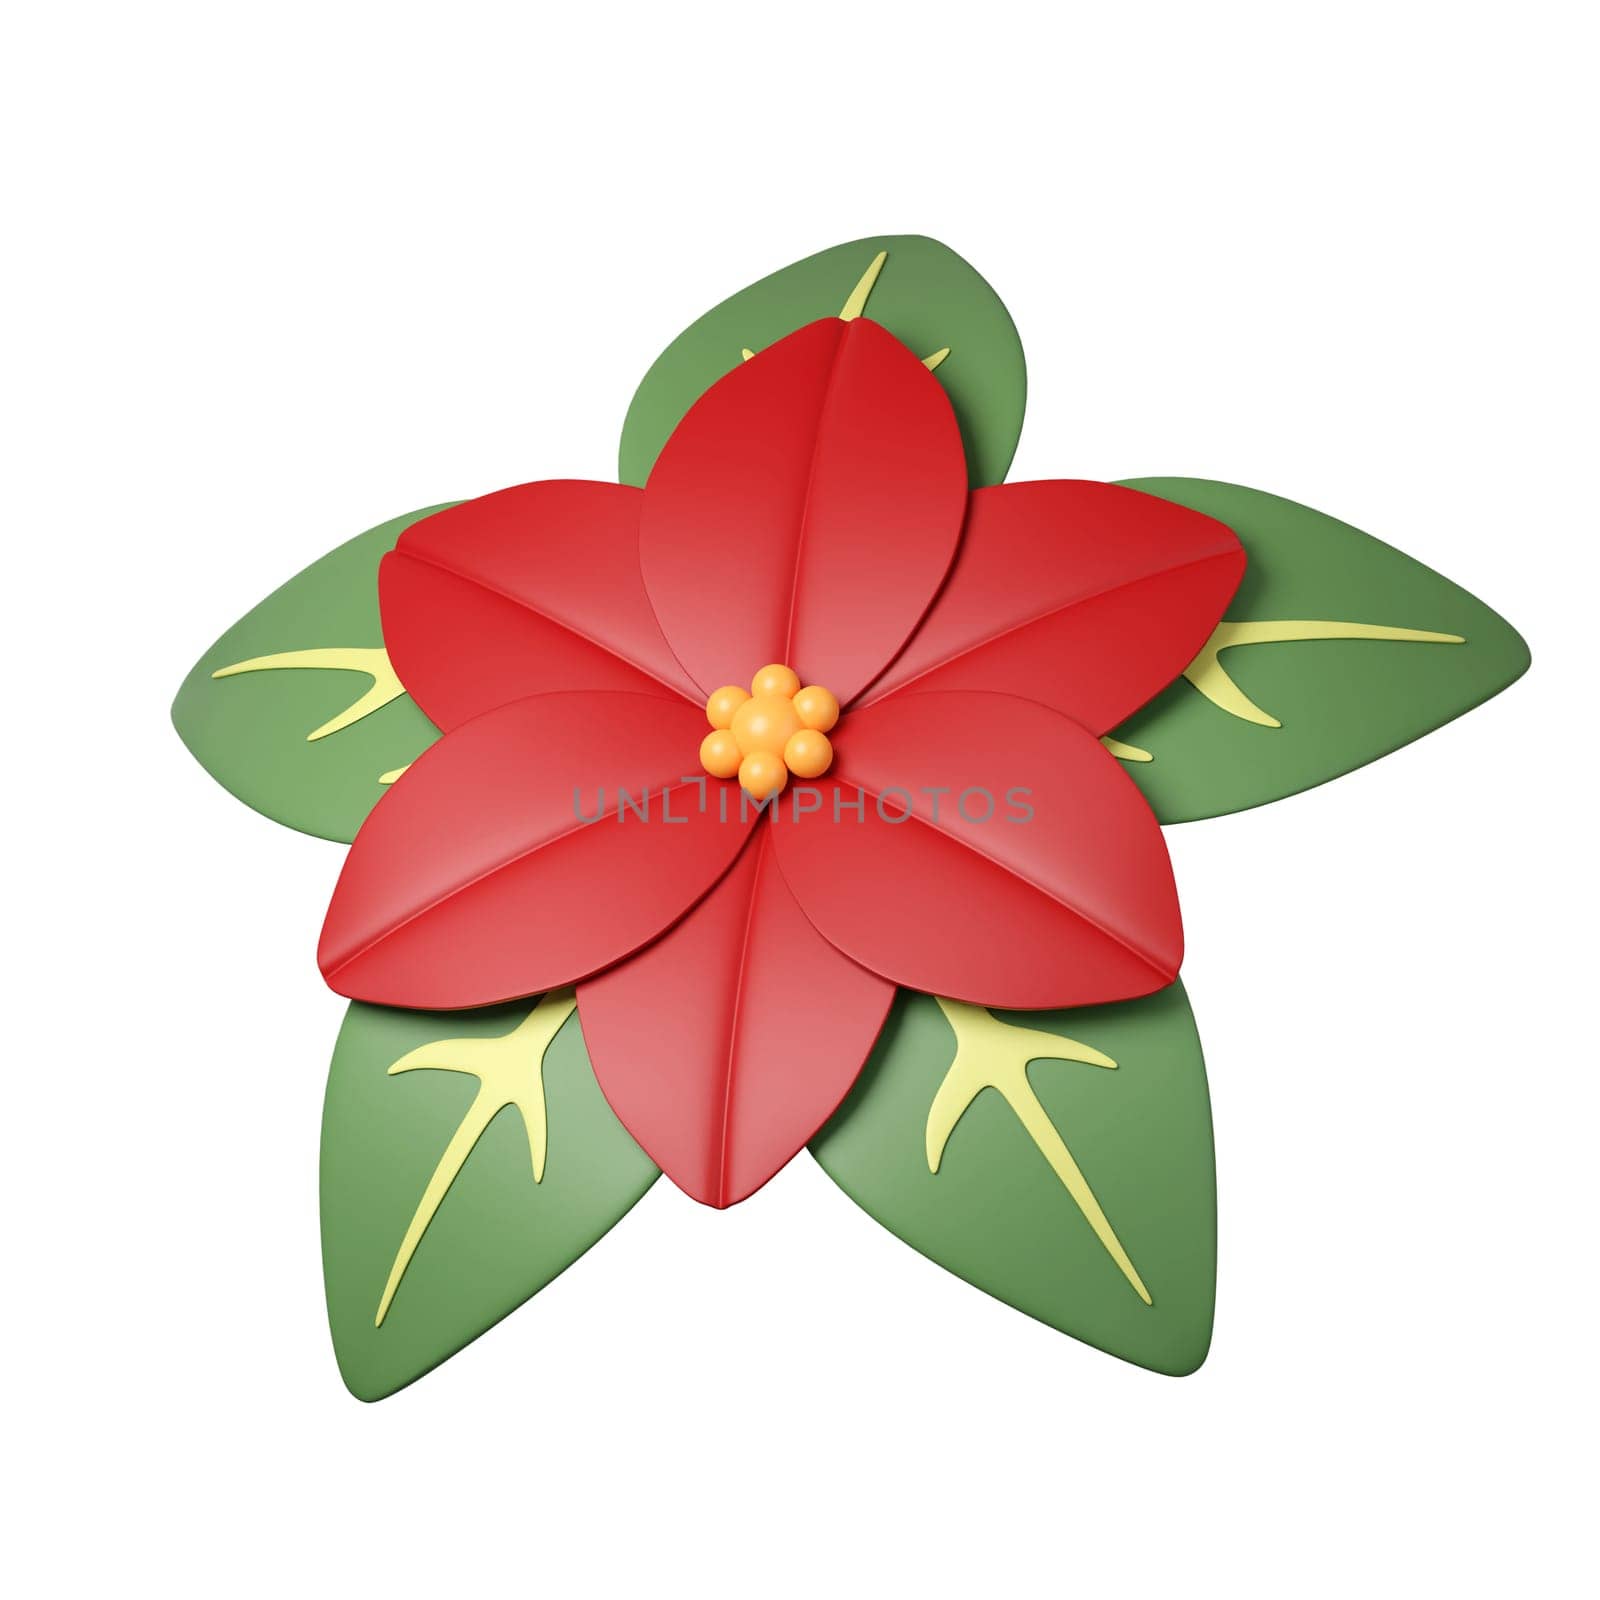 3d Christmas Poinsettia flower icon. minimal decorative festive conical shape tree. New Year's holiday decor. 3d design element In cartoon style. Icon isolated on white background. 3d illustration by meepiangraphic